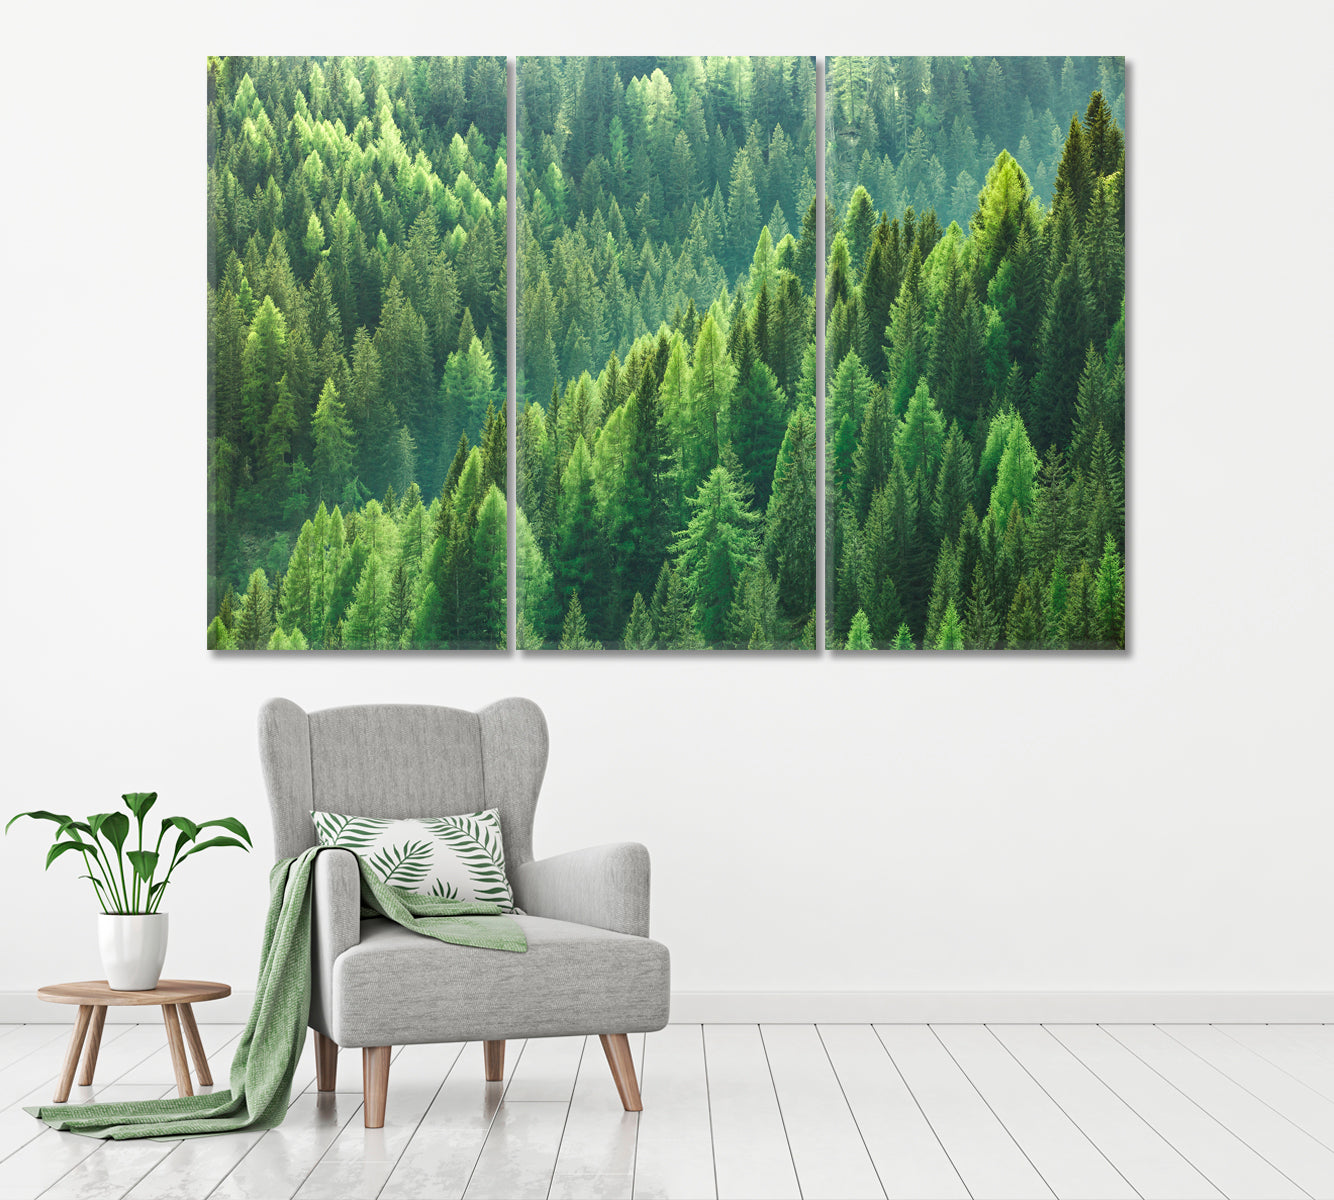 Green Forest of Fir and Pine Trees Canvas Print ArtLexy 3 Panels 36"x24" inches 